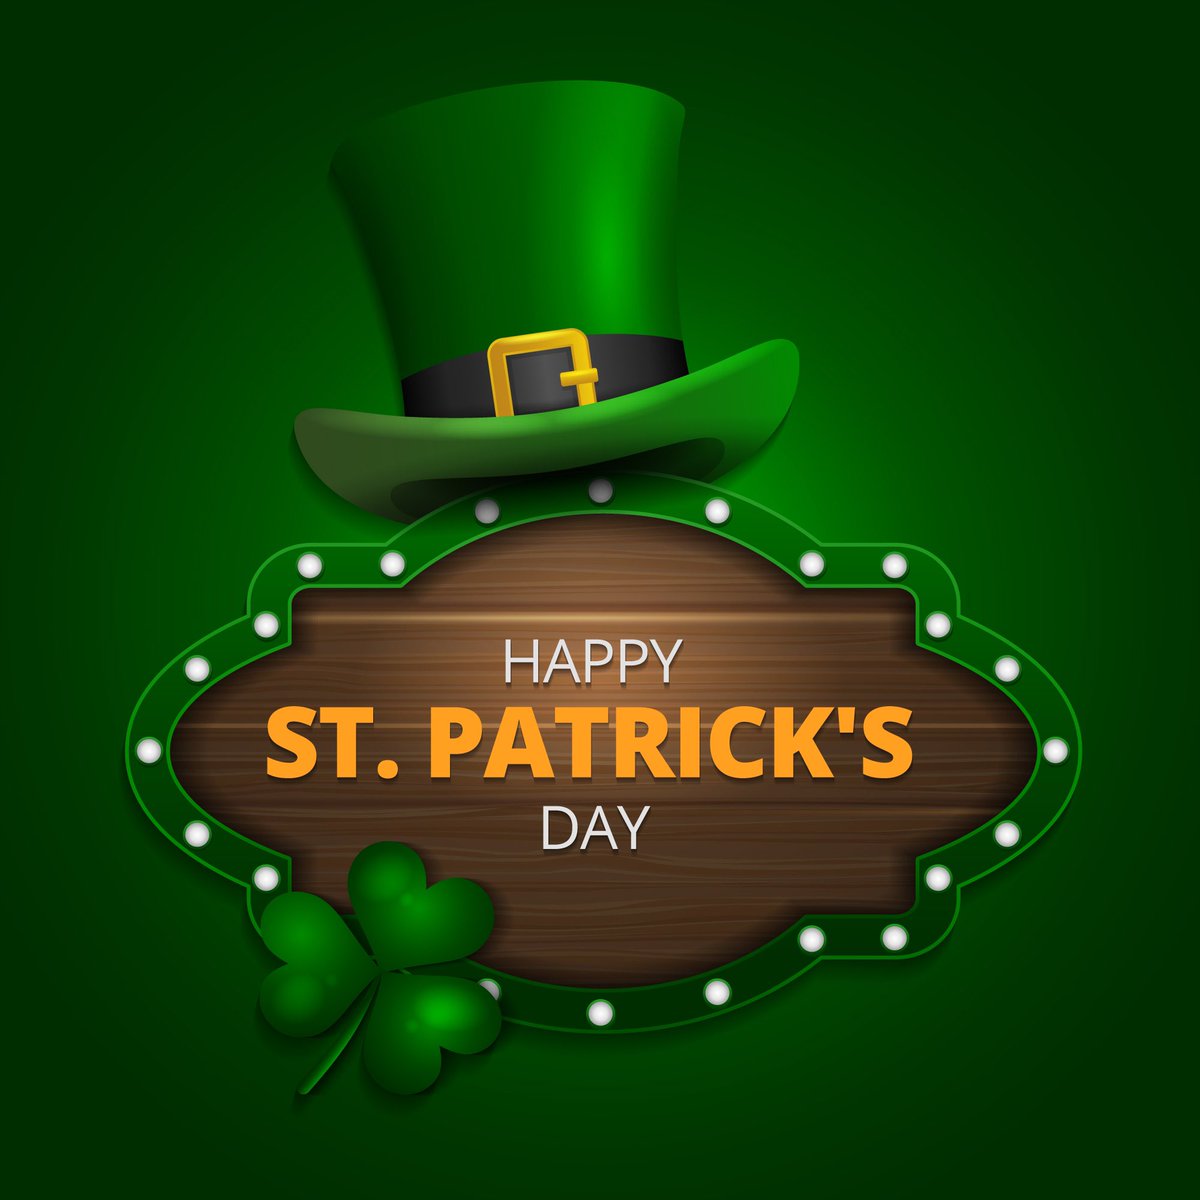 Today is St Patrick’s Day ☘️🇮🇪. Wishing all our Irish staff, friends and their families a special day of festivities and celebrations. #stpatricksday #ireland🍀